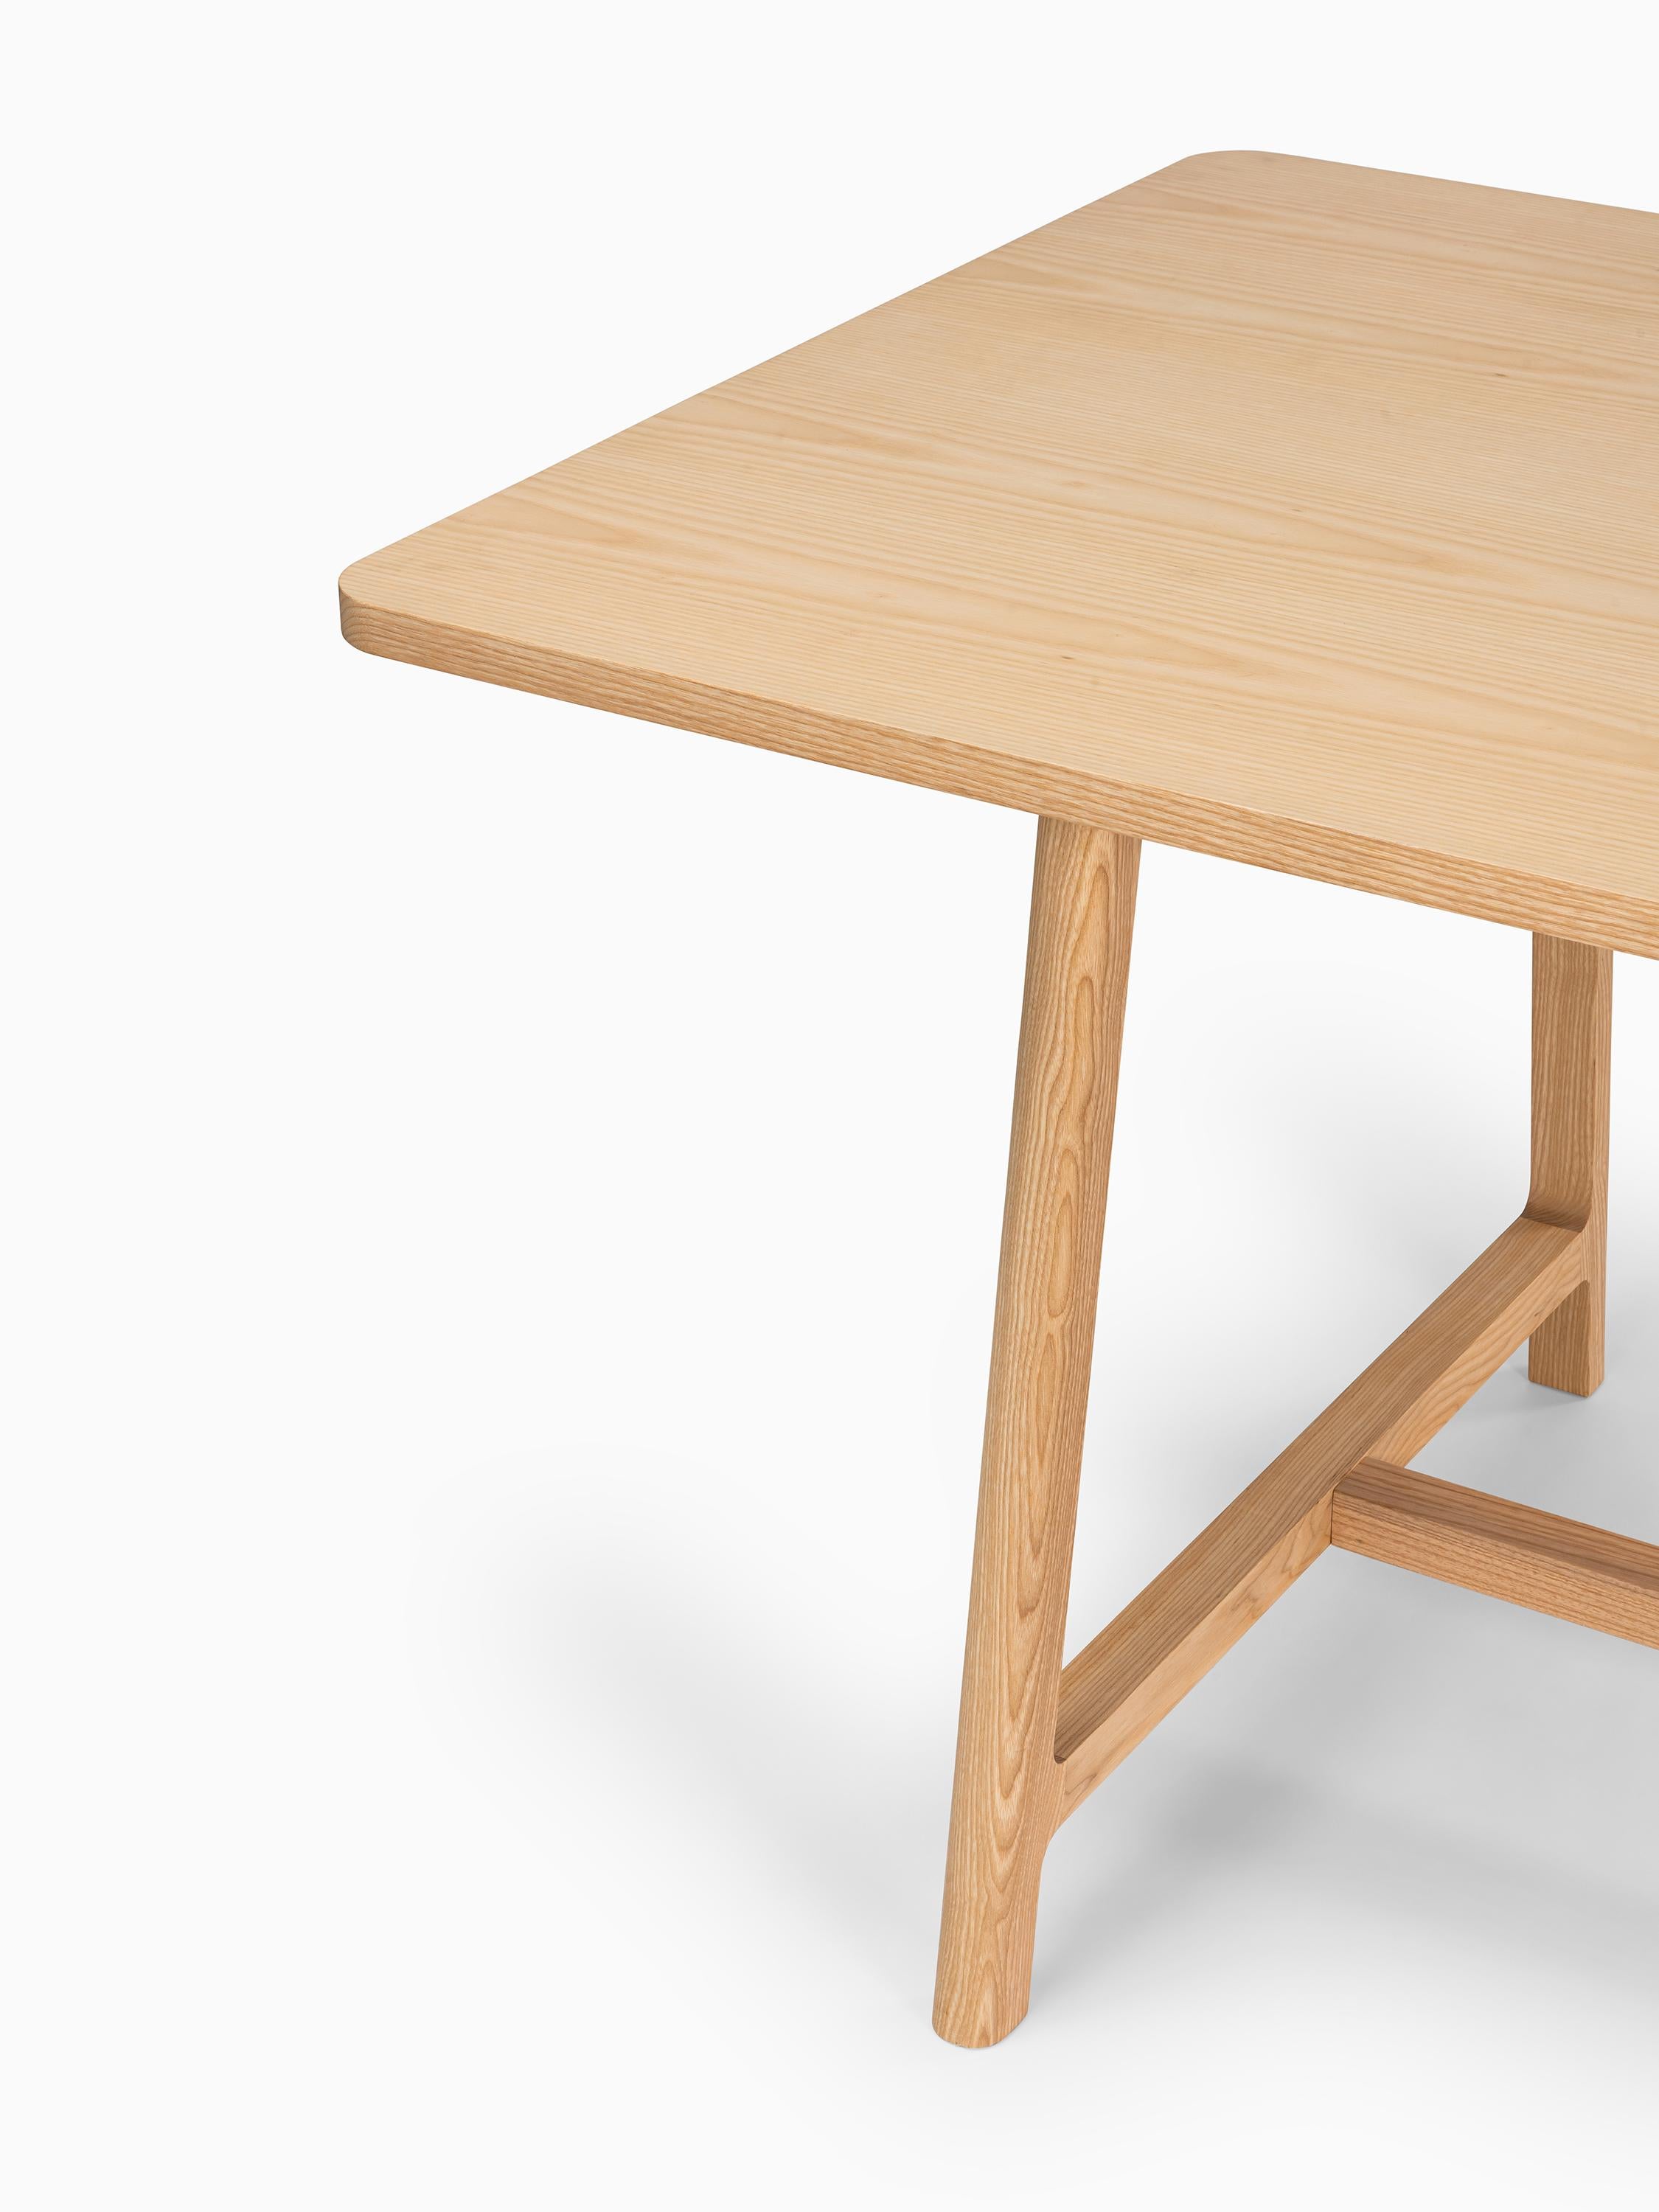 Minimalist Modern Table in Ash Wood FRAME Collection In New Condition For Sale In Lisbon, PT